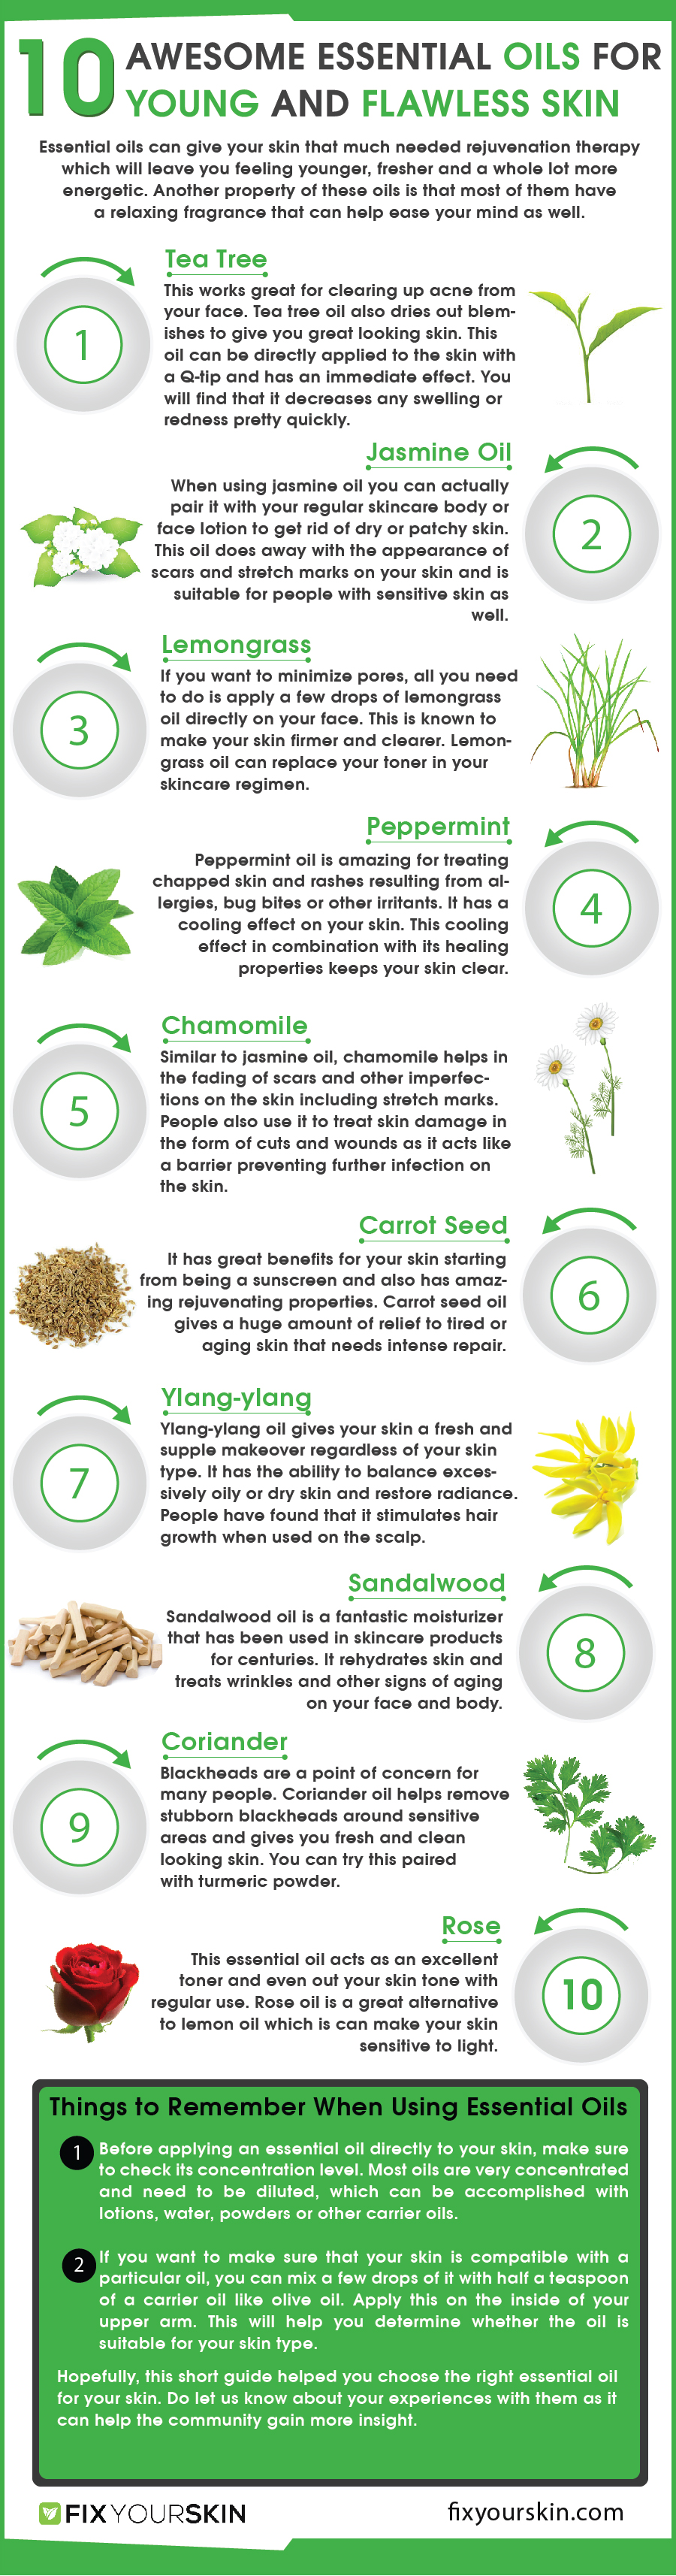 10 Best Essential Oils For Flawless Skin